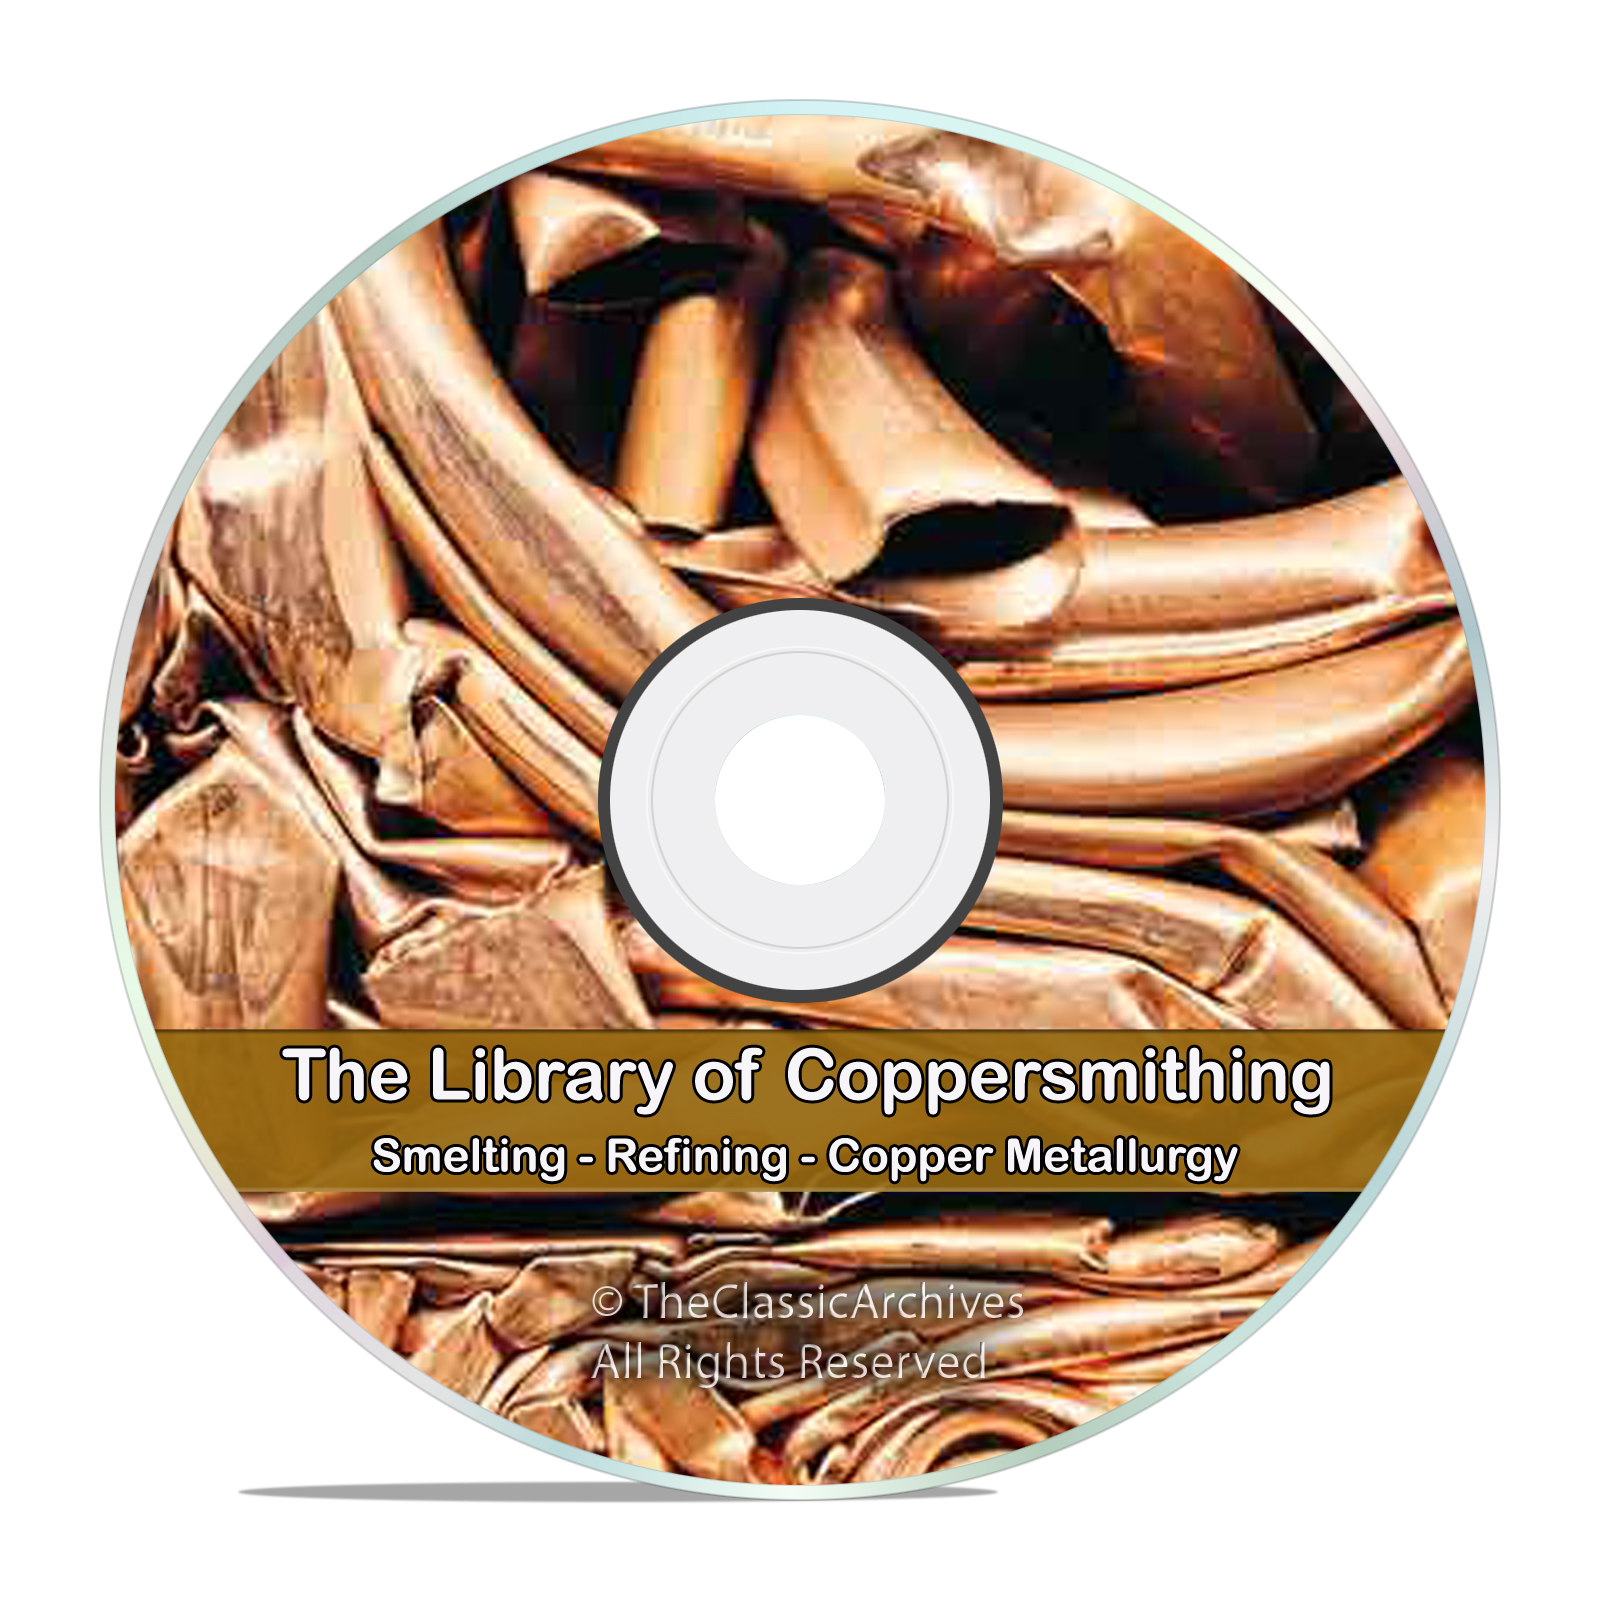 Copper Smelting Refining Mining Coppersmithing Metallurgy Reference Book CD